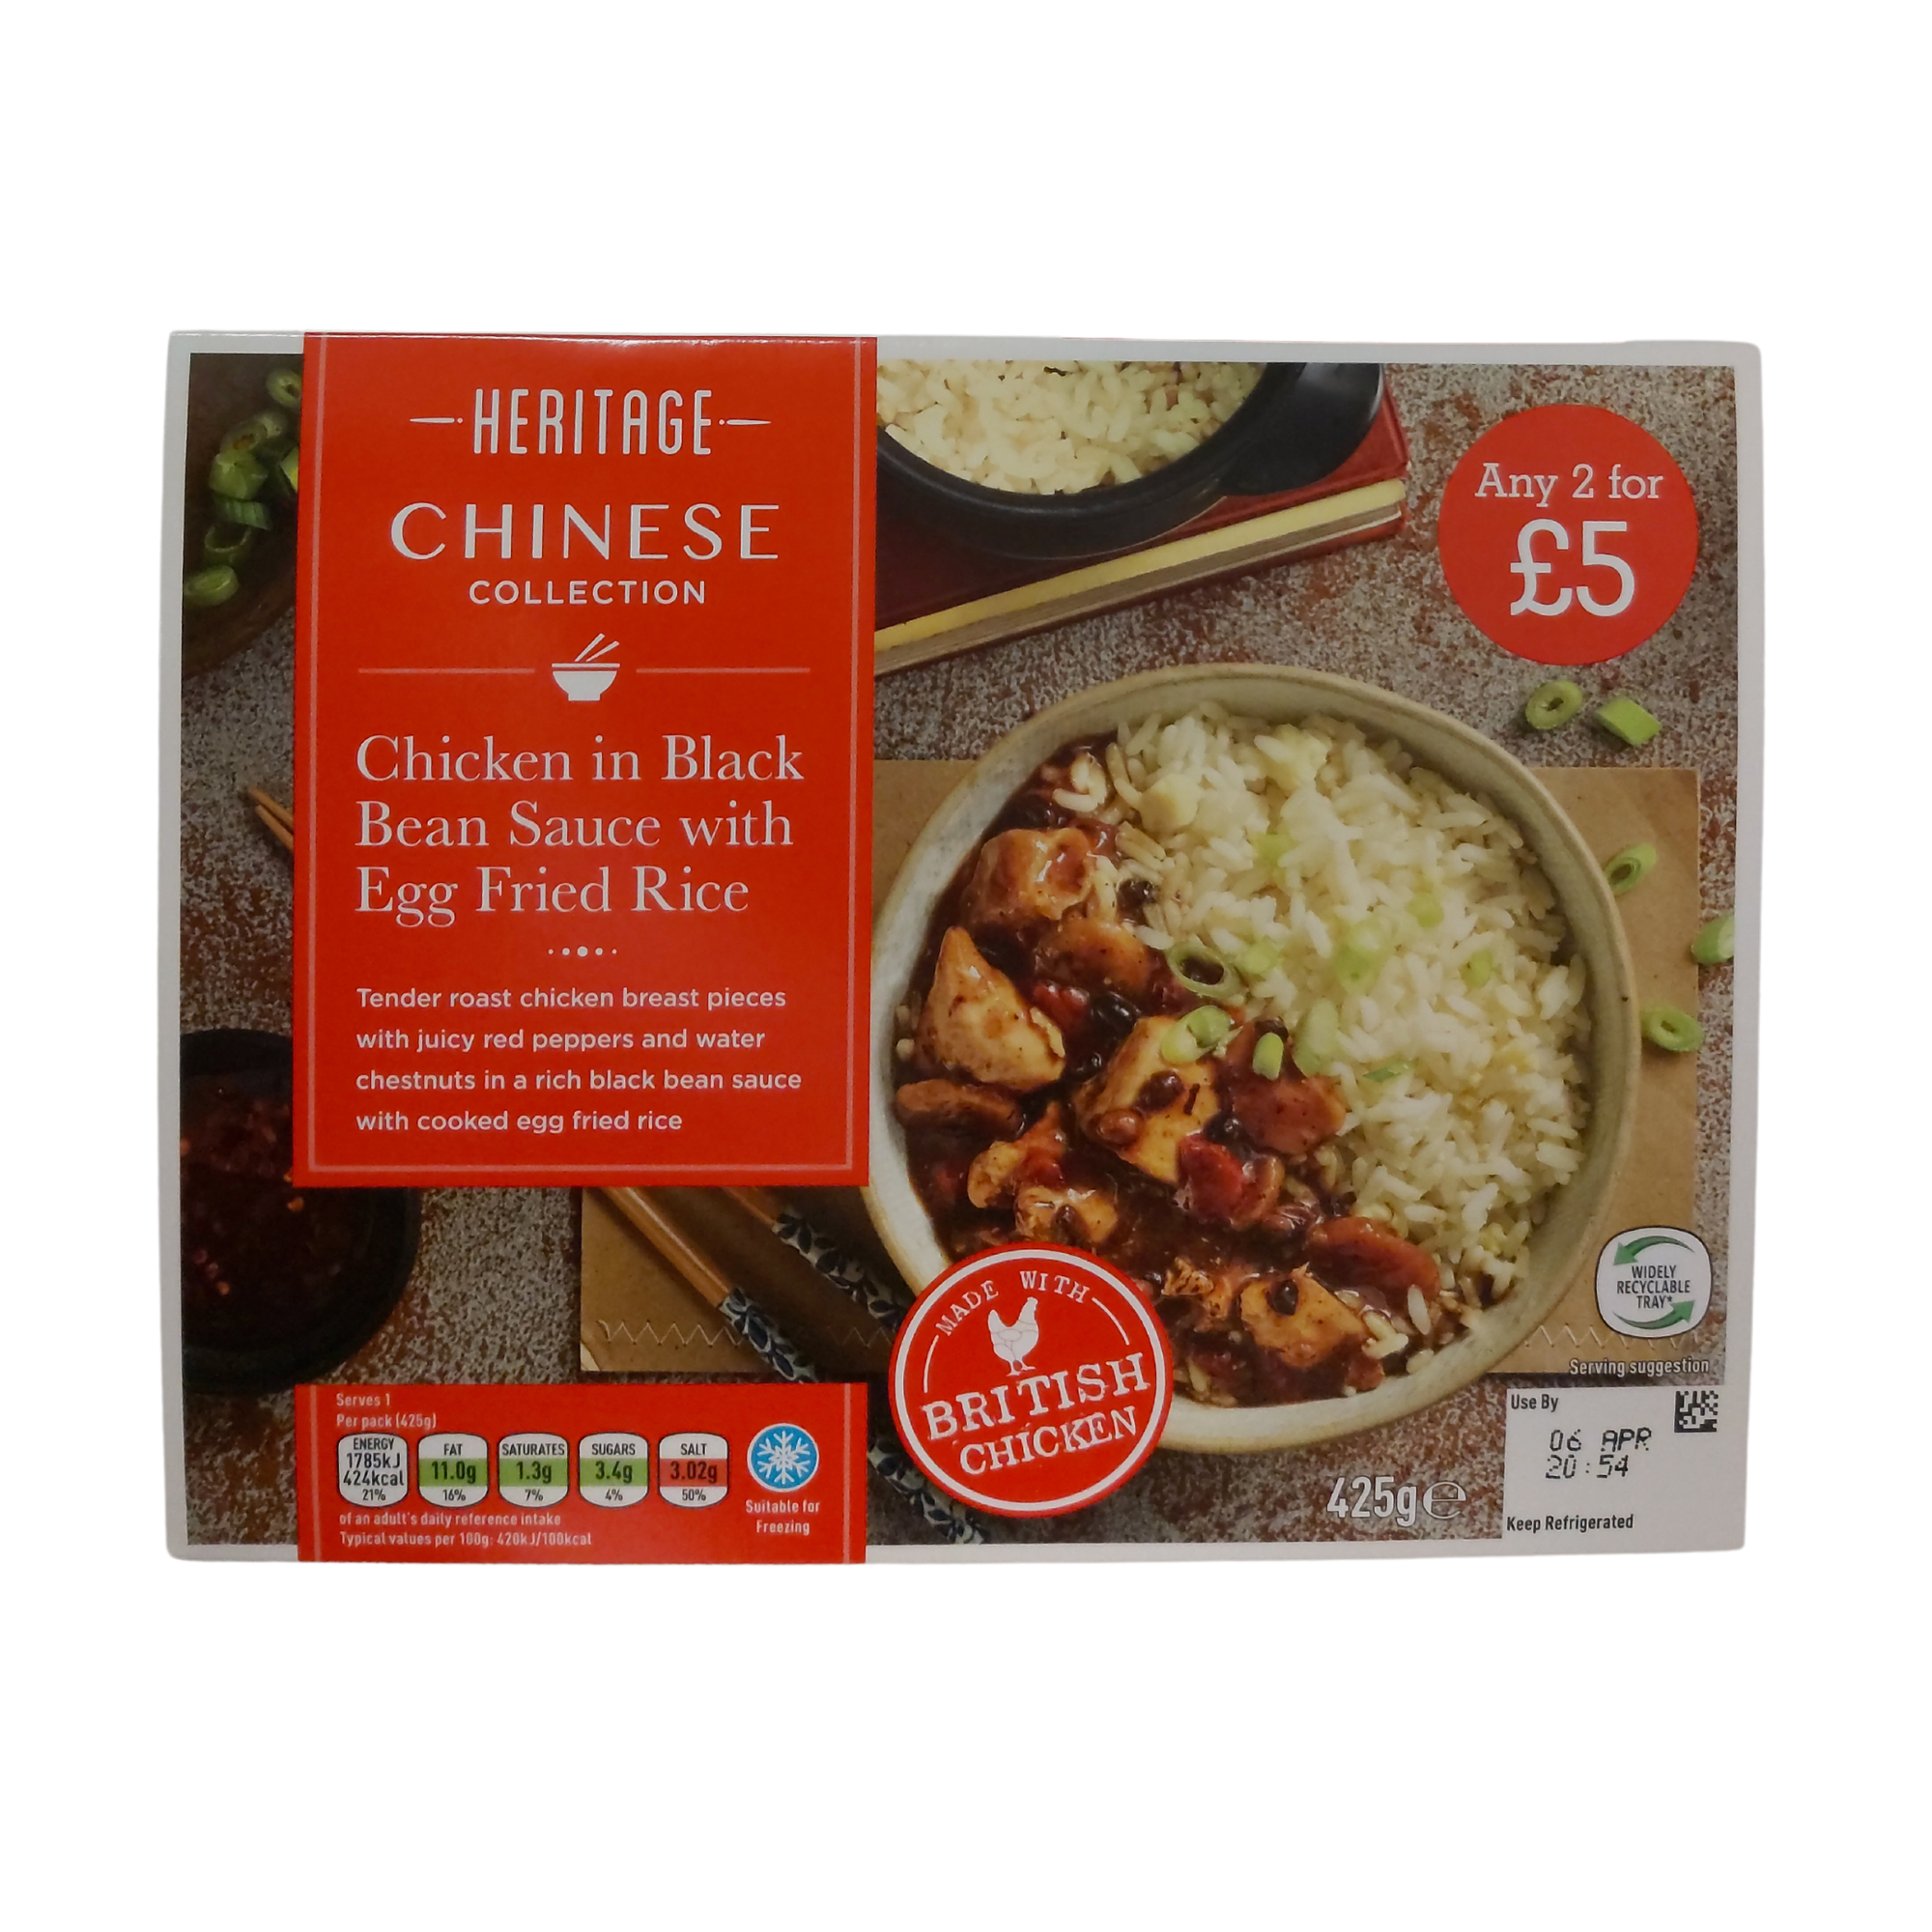 Heritage Chicken in Black Bean Sauce with Egg Fried Rice 425g